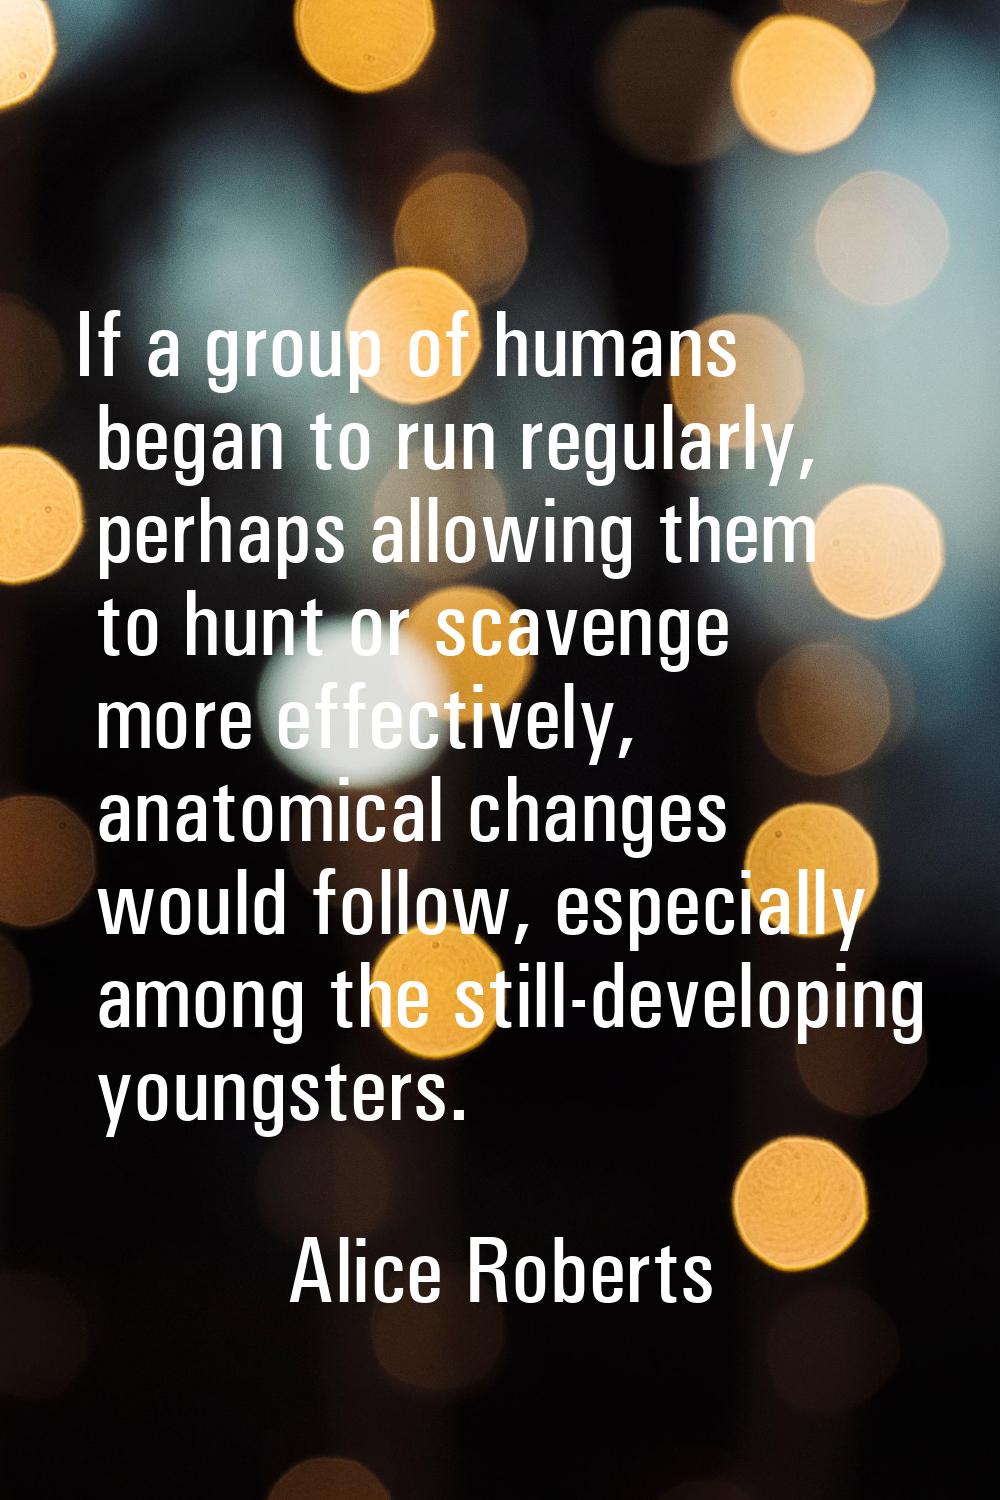 If a group of humans began to run regularly, perhaps allowing them to hunt or scavenge more effecti